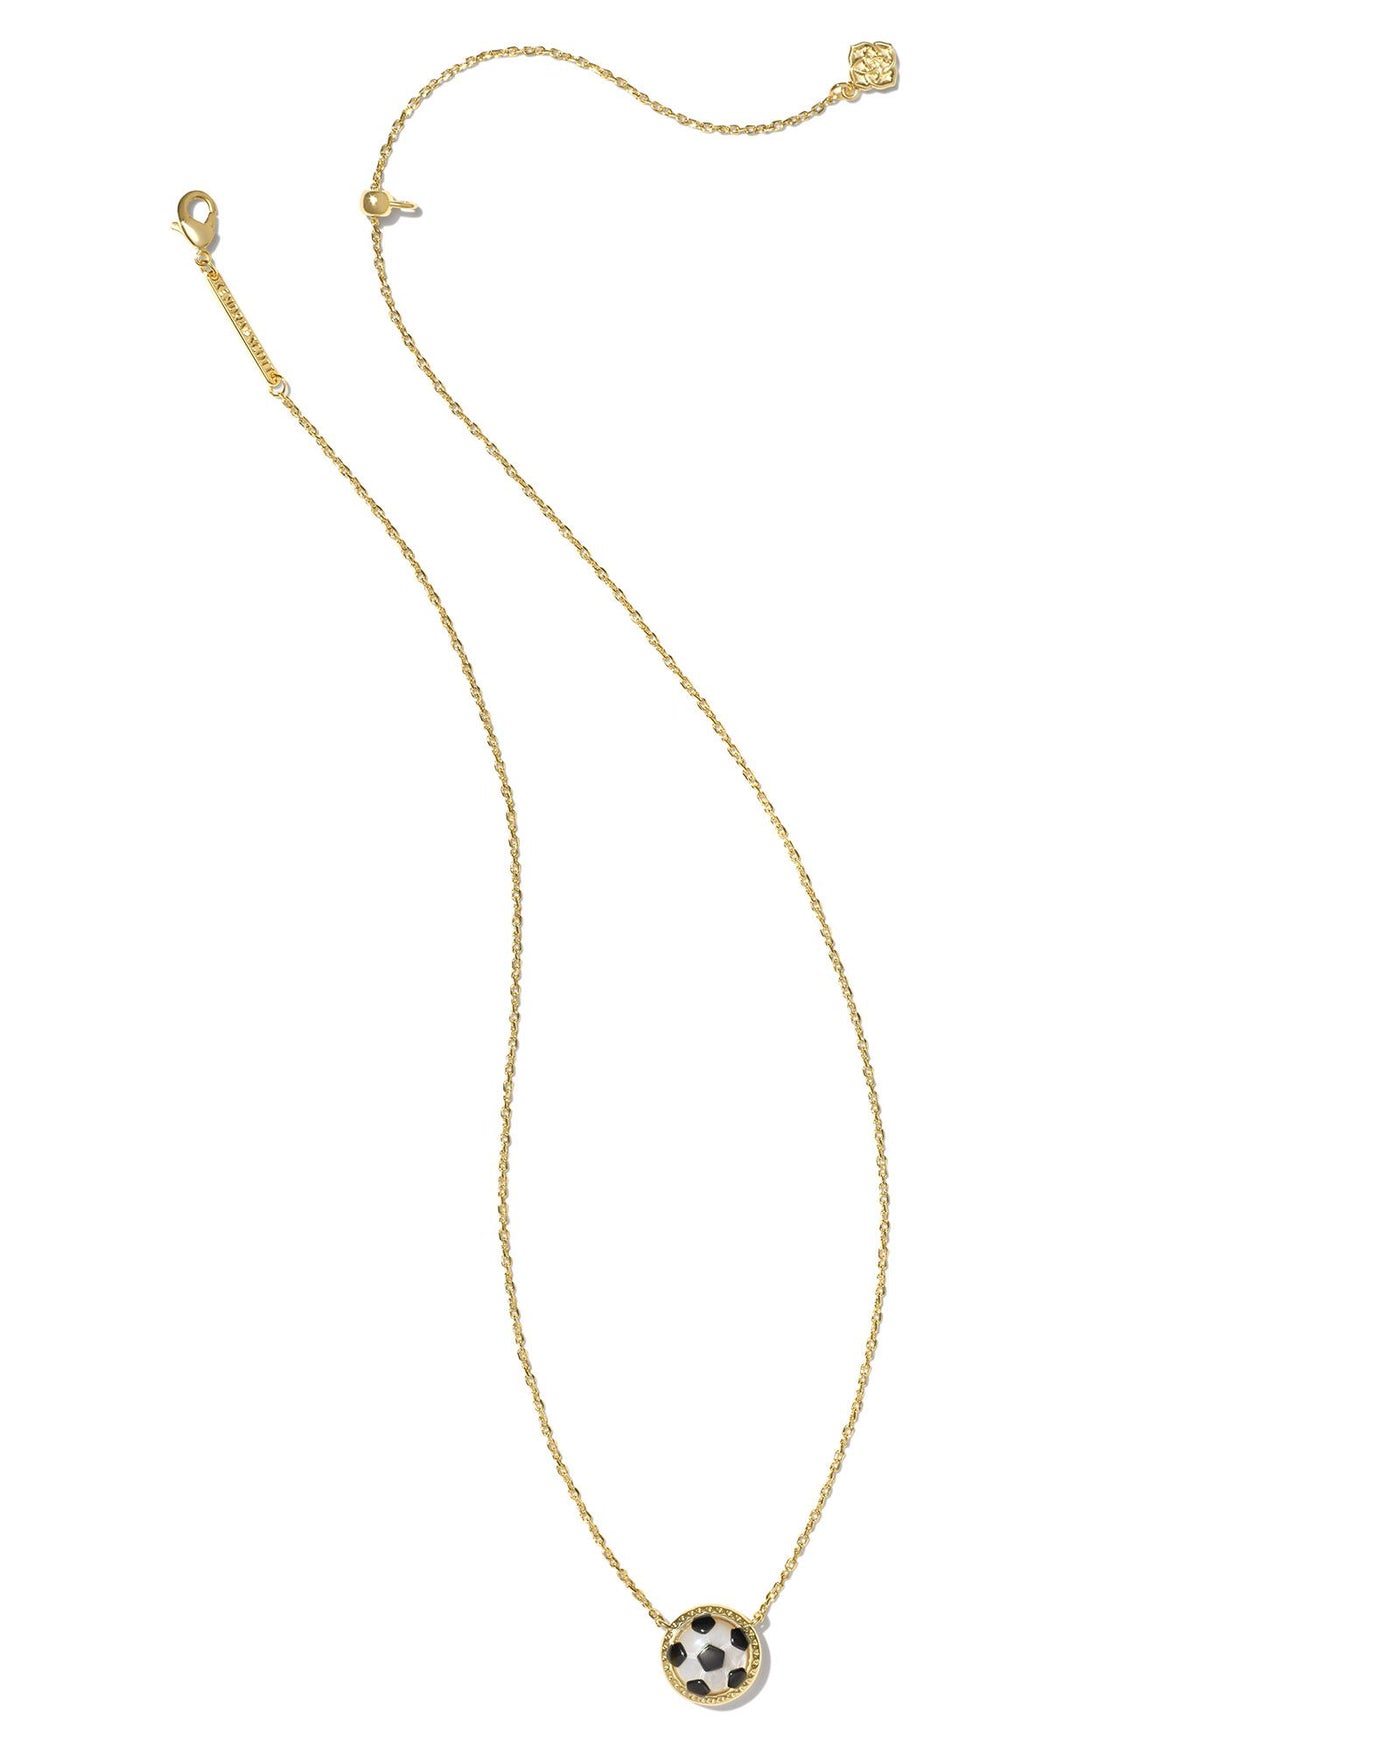 Kendra Scott Soccer Pendant Necklace in Gold on white background full view.